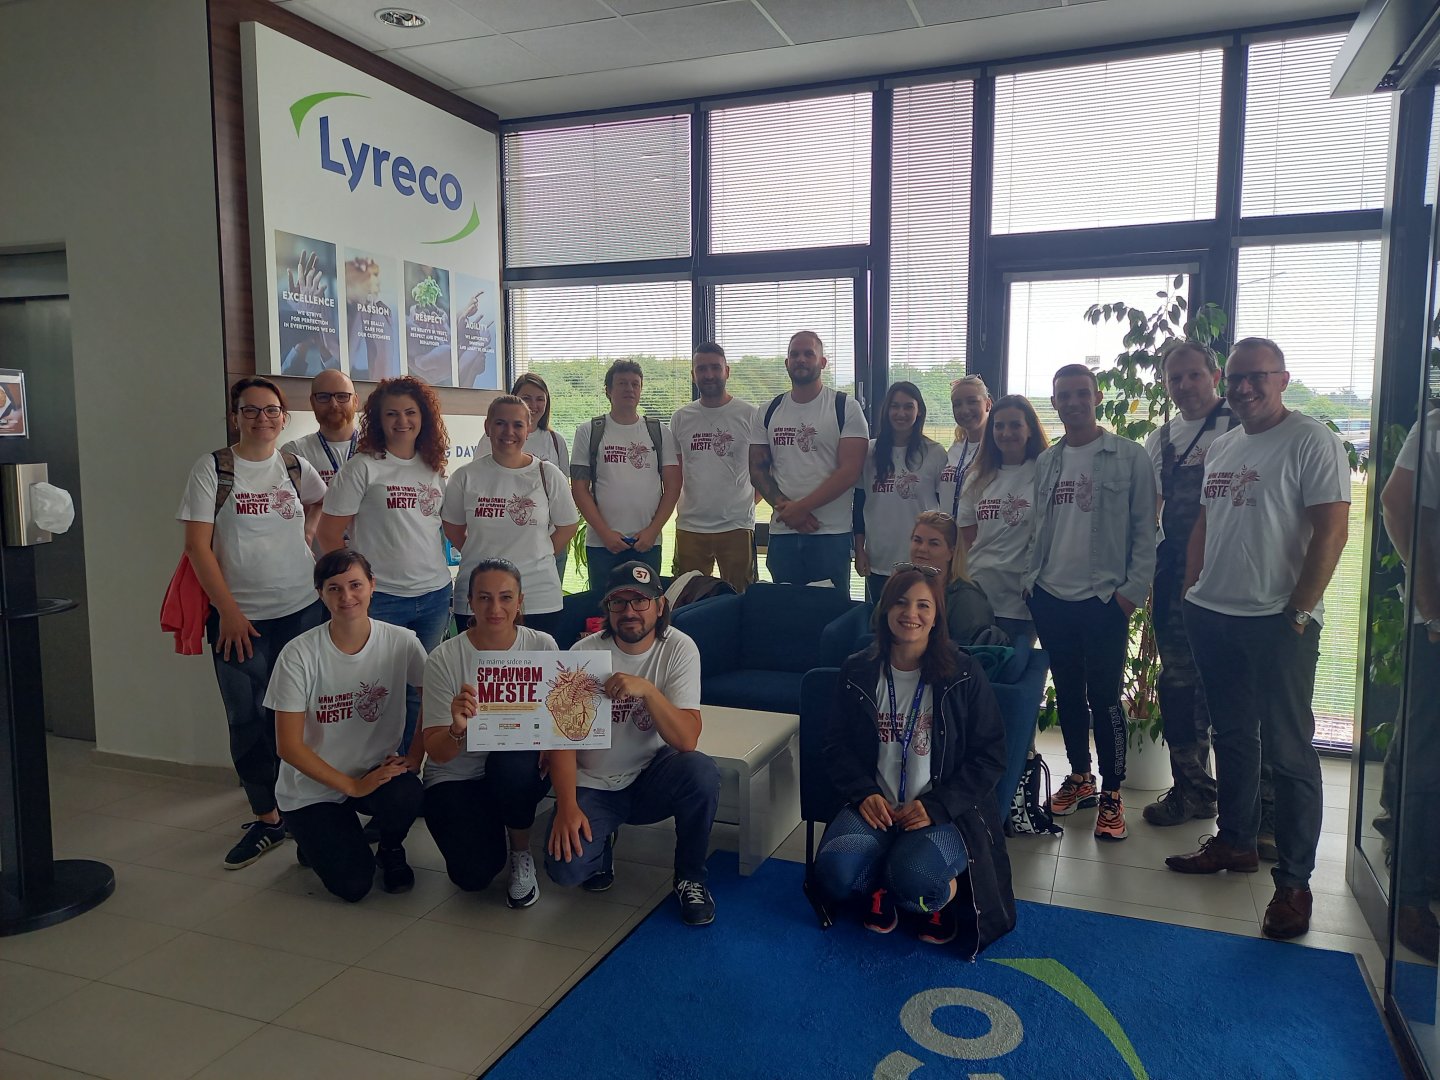 Lyreco Central Europe employees